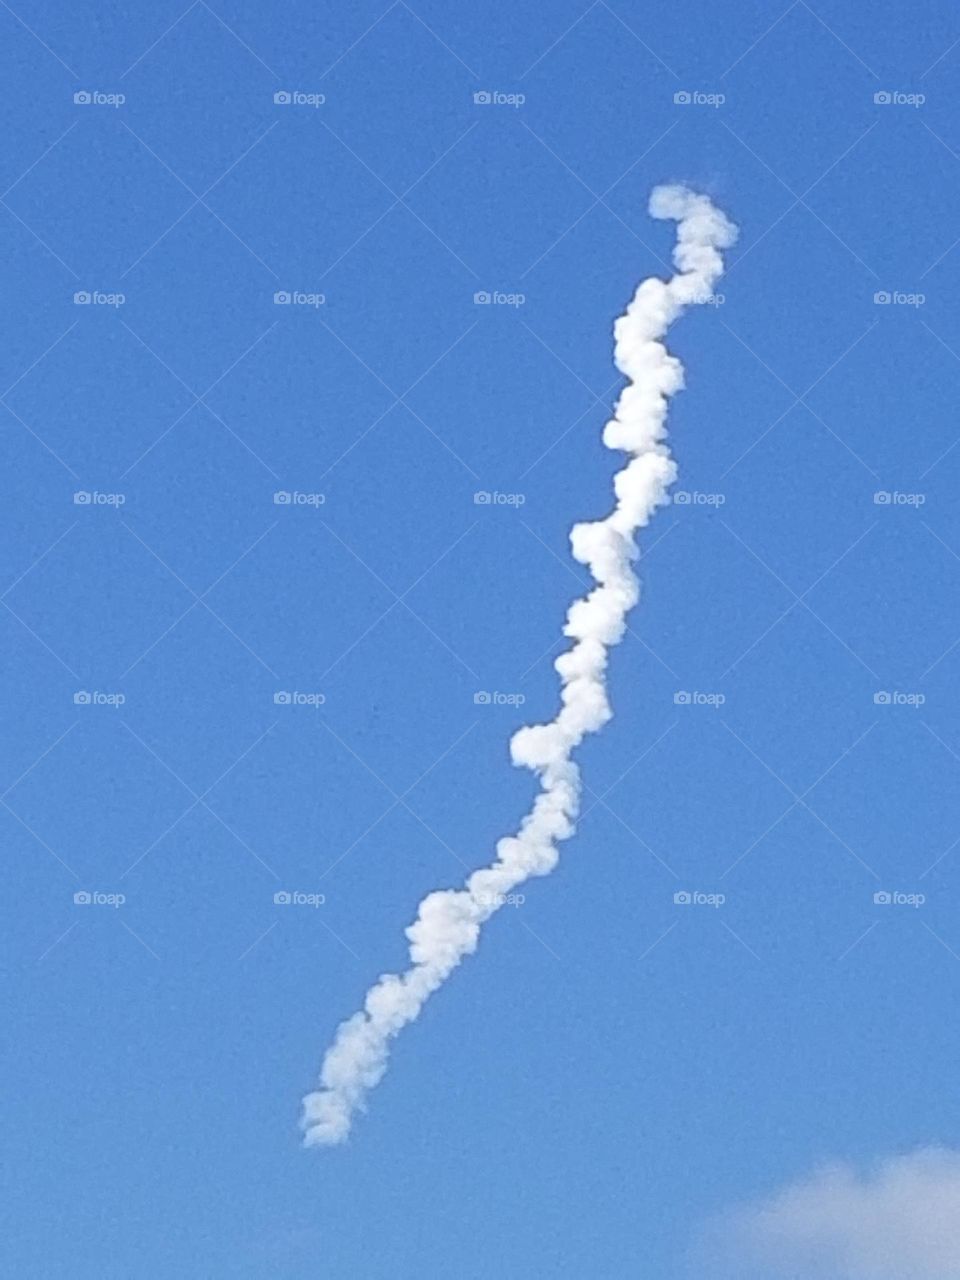 SpaceX plume